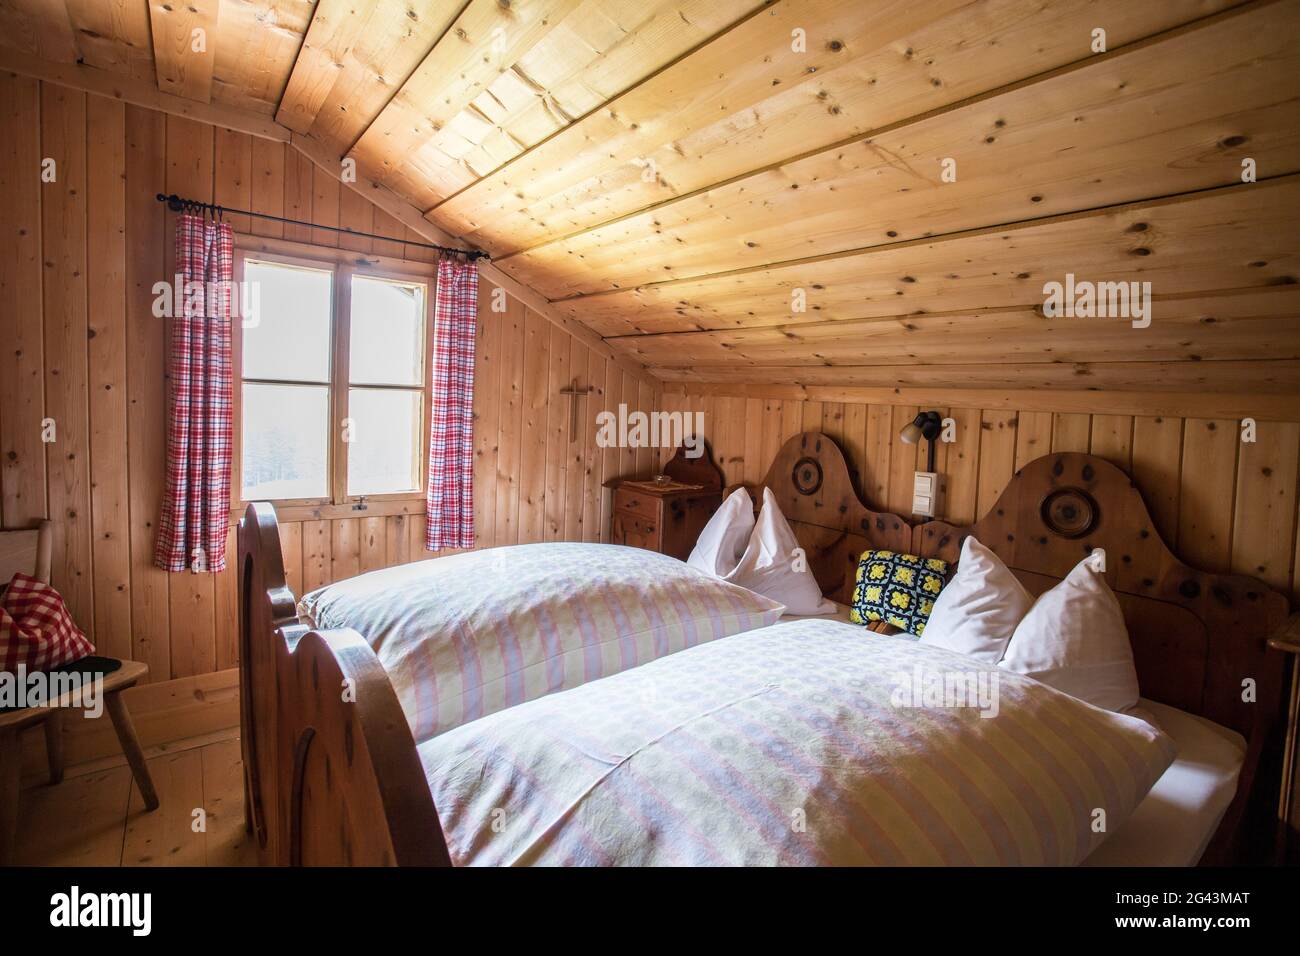 Holiday in the mountains: Rustic old wooden interior of a cabin or alpine hut Stock Photo